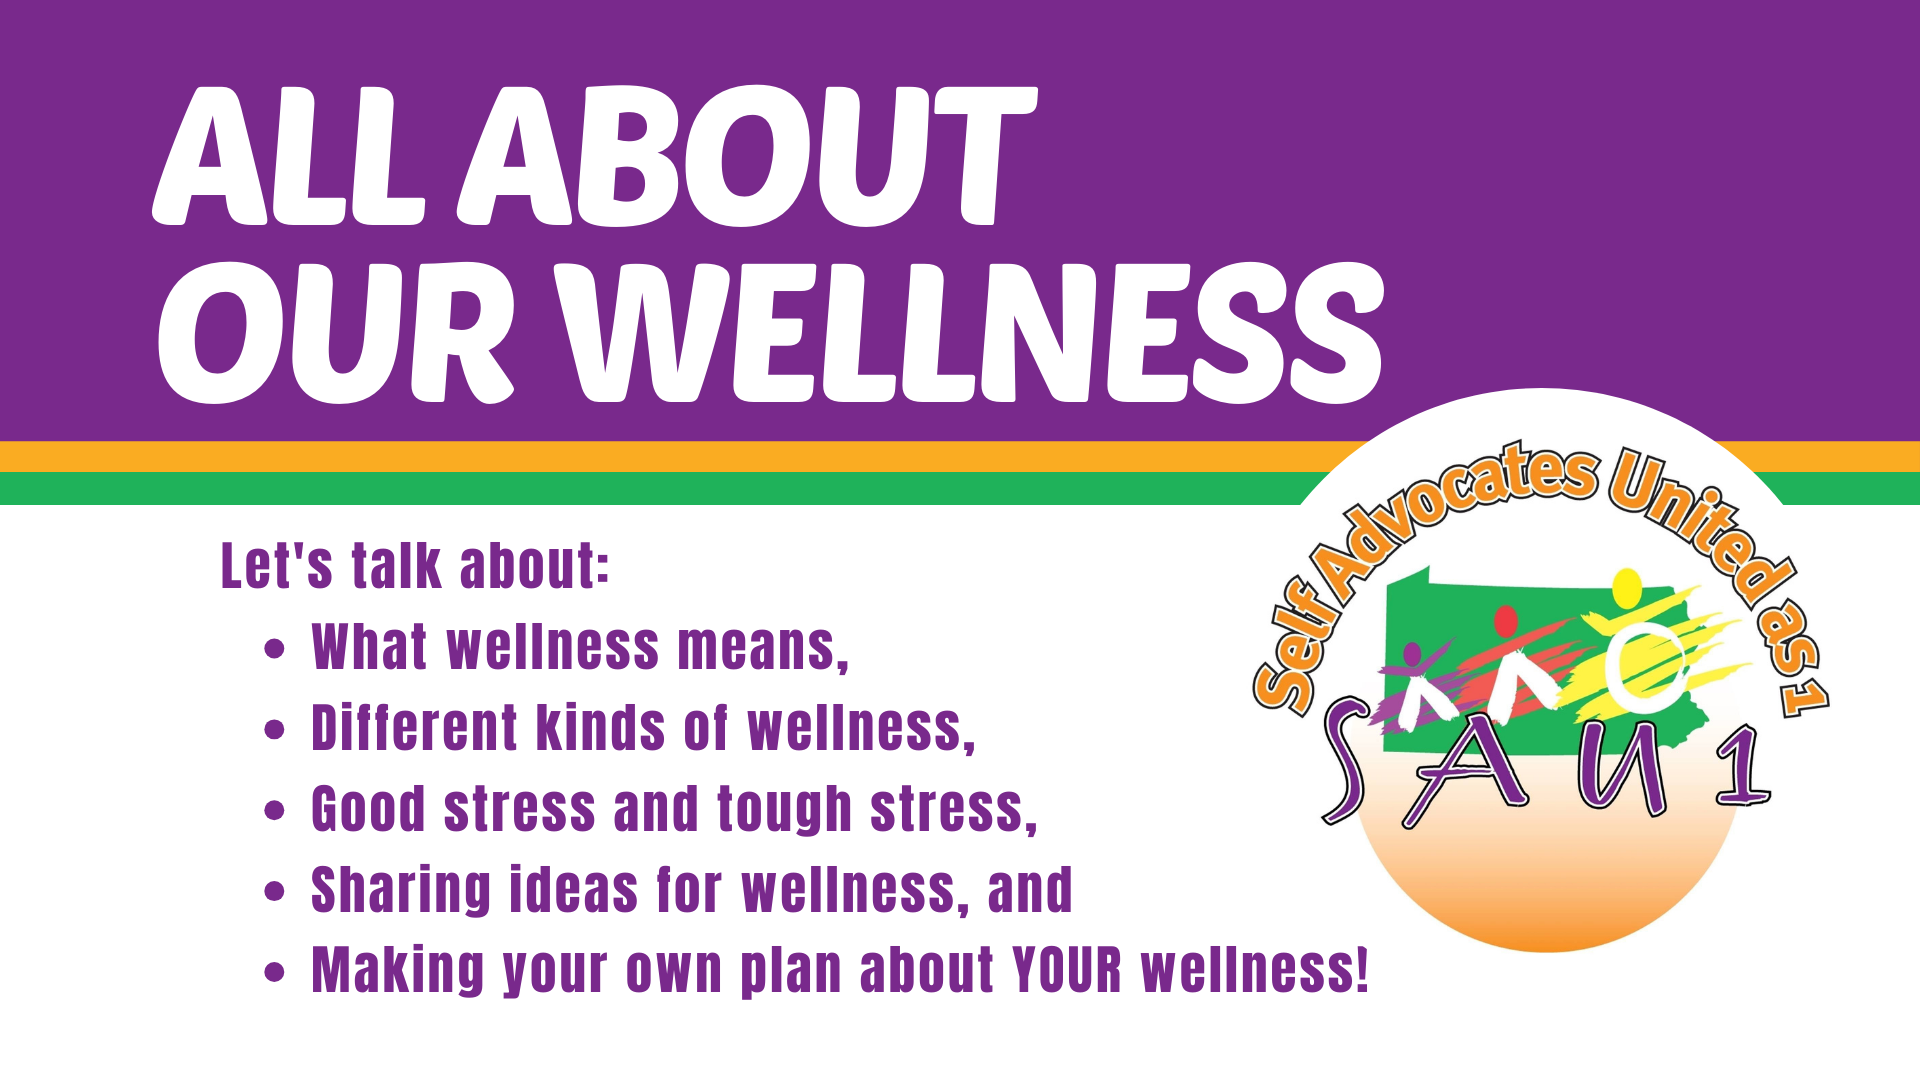 Banner. Text to the left of the SAU1 logo reads ALL ABOUT OUR WELLNESS Let's talk about: What wellness means, Different kinds of wellness, Good stress and tough stress, Sharing ideas for wellness, and Making your own plan about YOUR wellness!  FIND OUT MORE AT SAU1.ORG